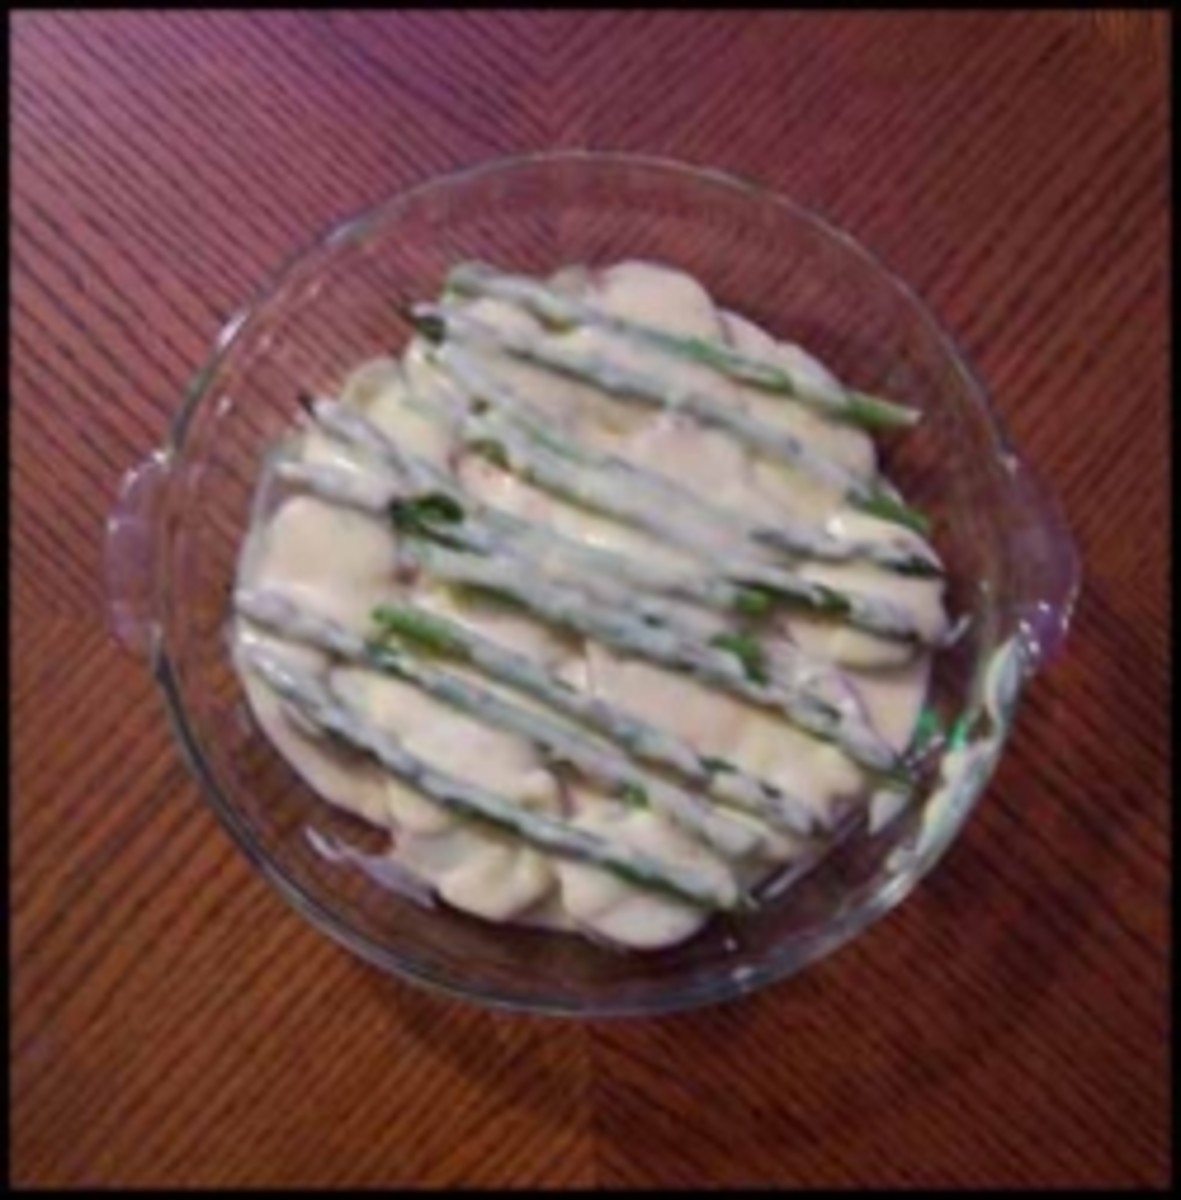 cheese sauce over asparagus and potatoes, photo by Kylyssa Shay